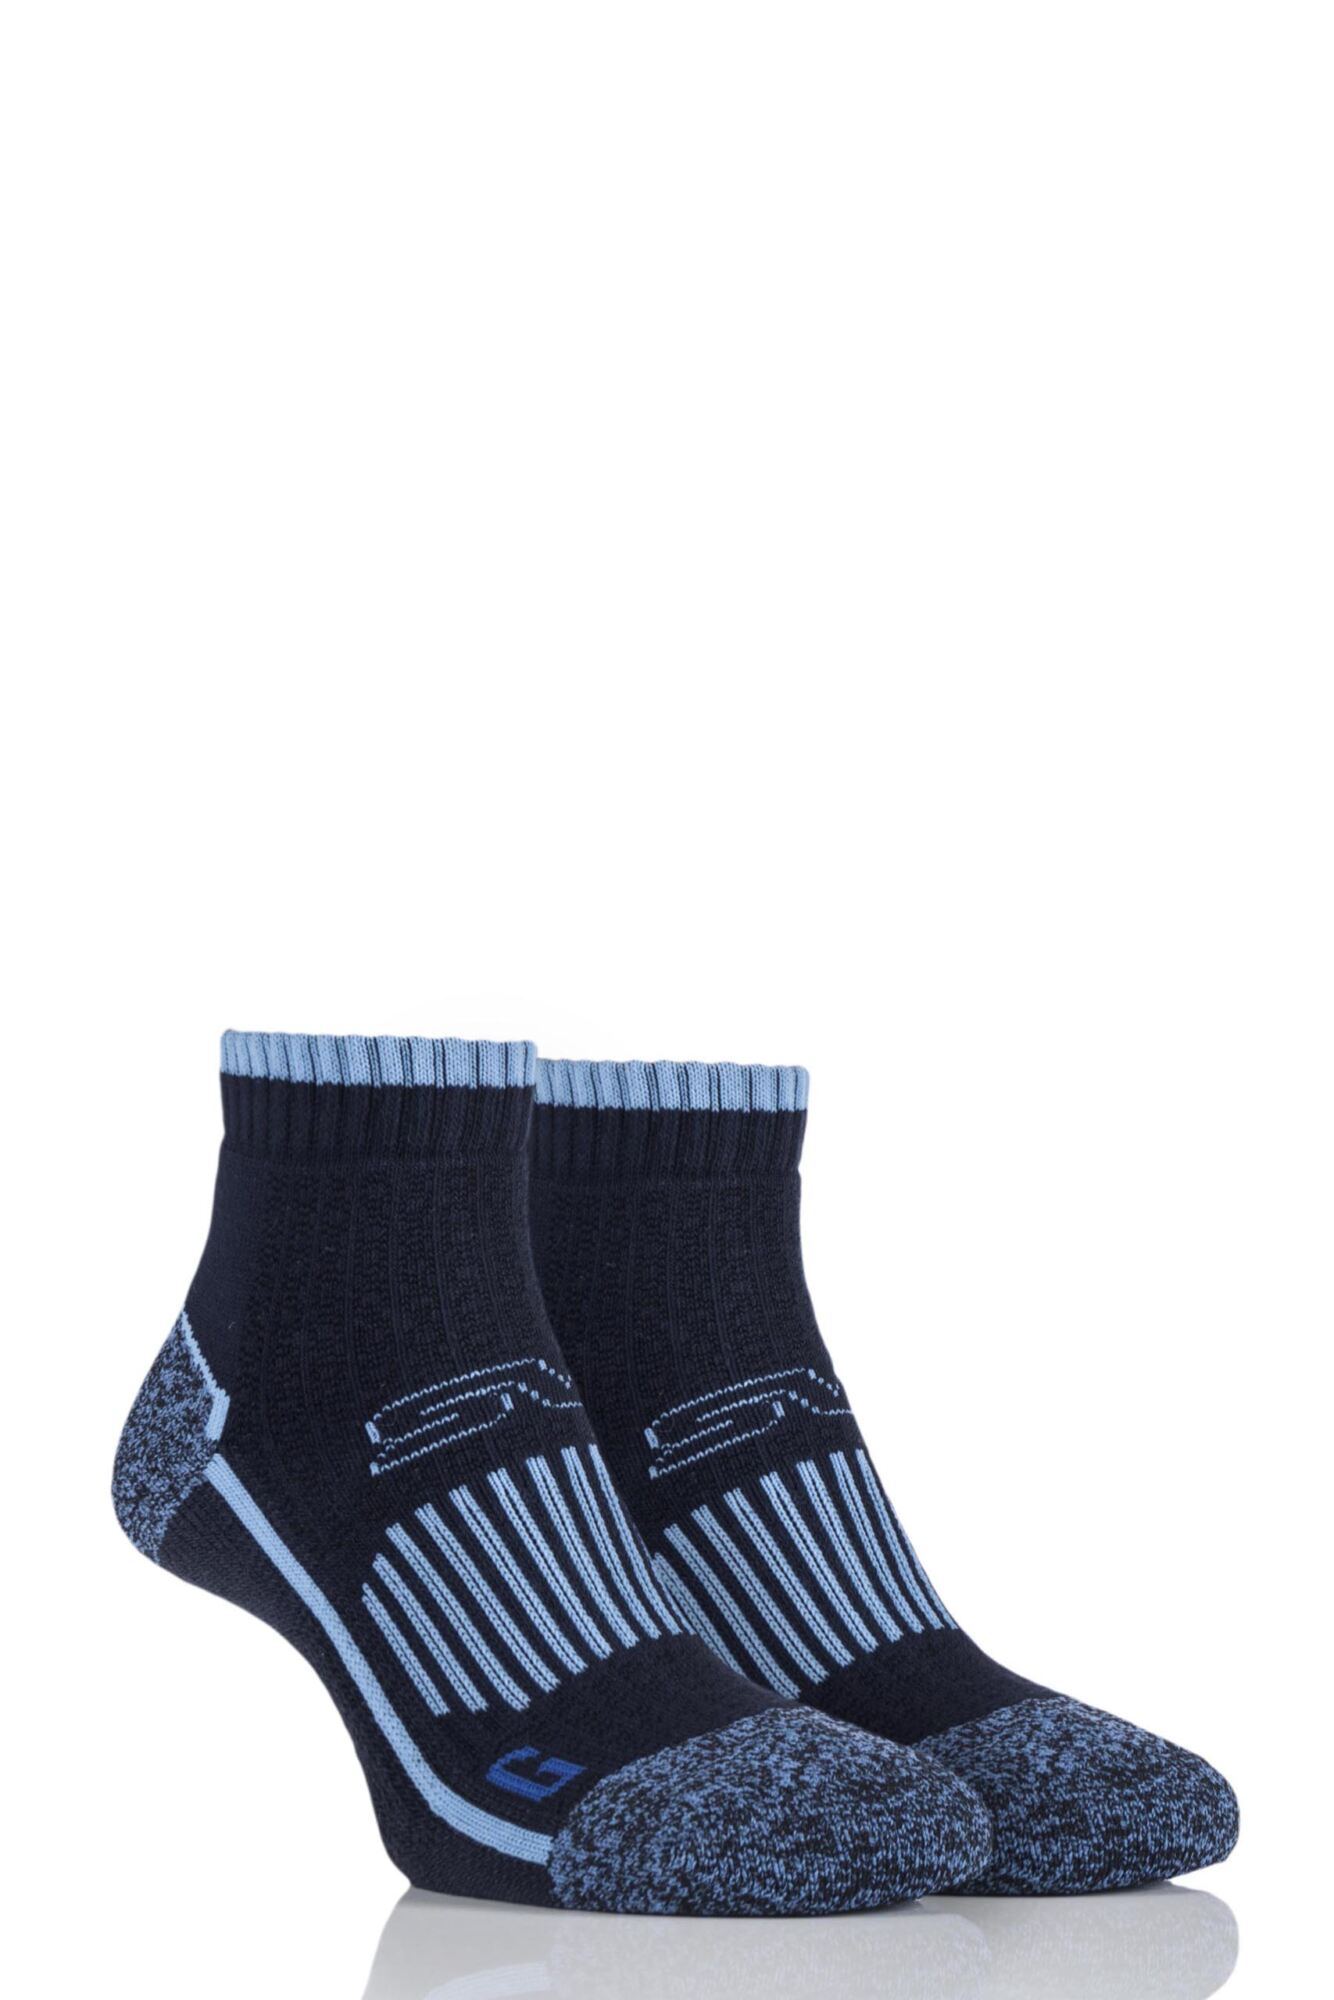 2 Pair with BlueGuard Ankle High Hiking Socks Ladies - Storm Bloc